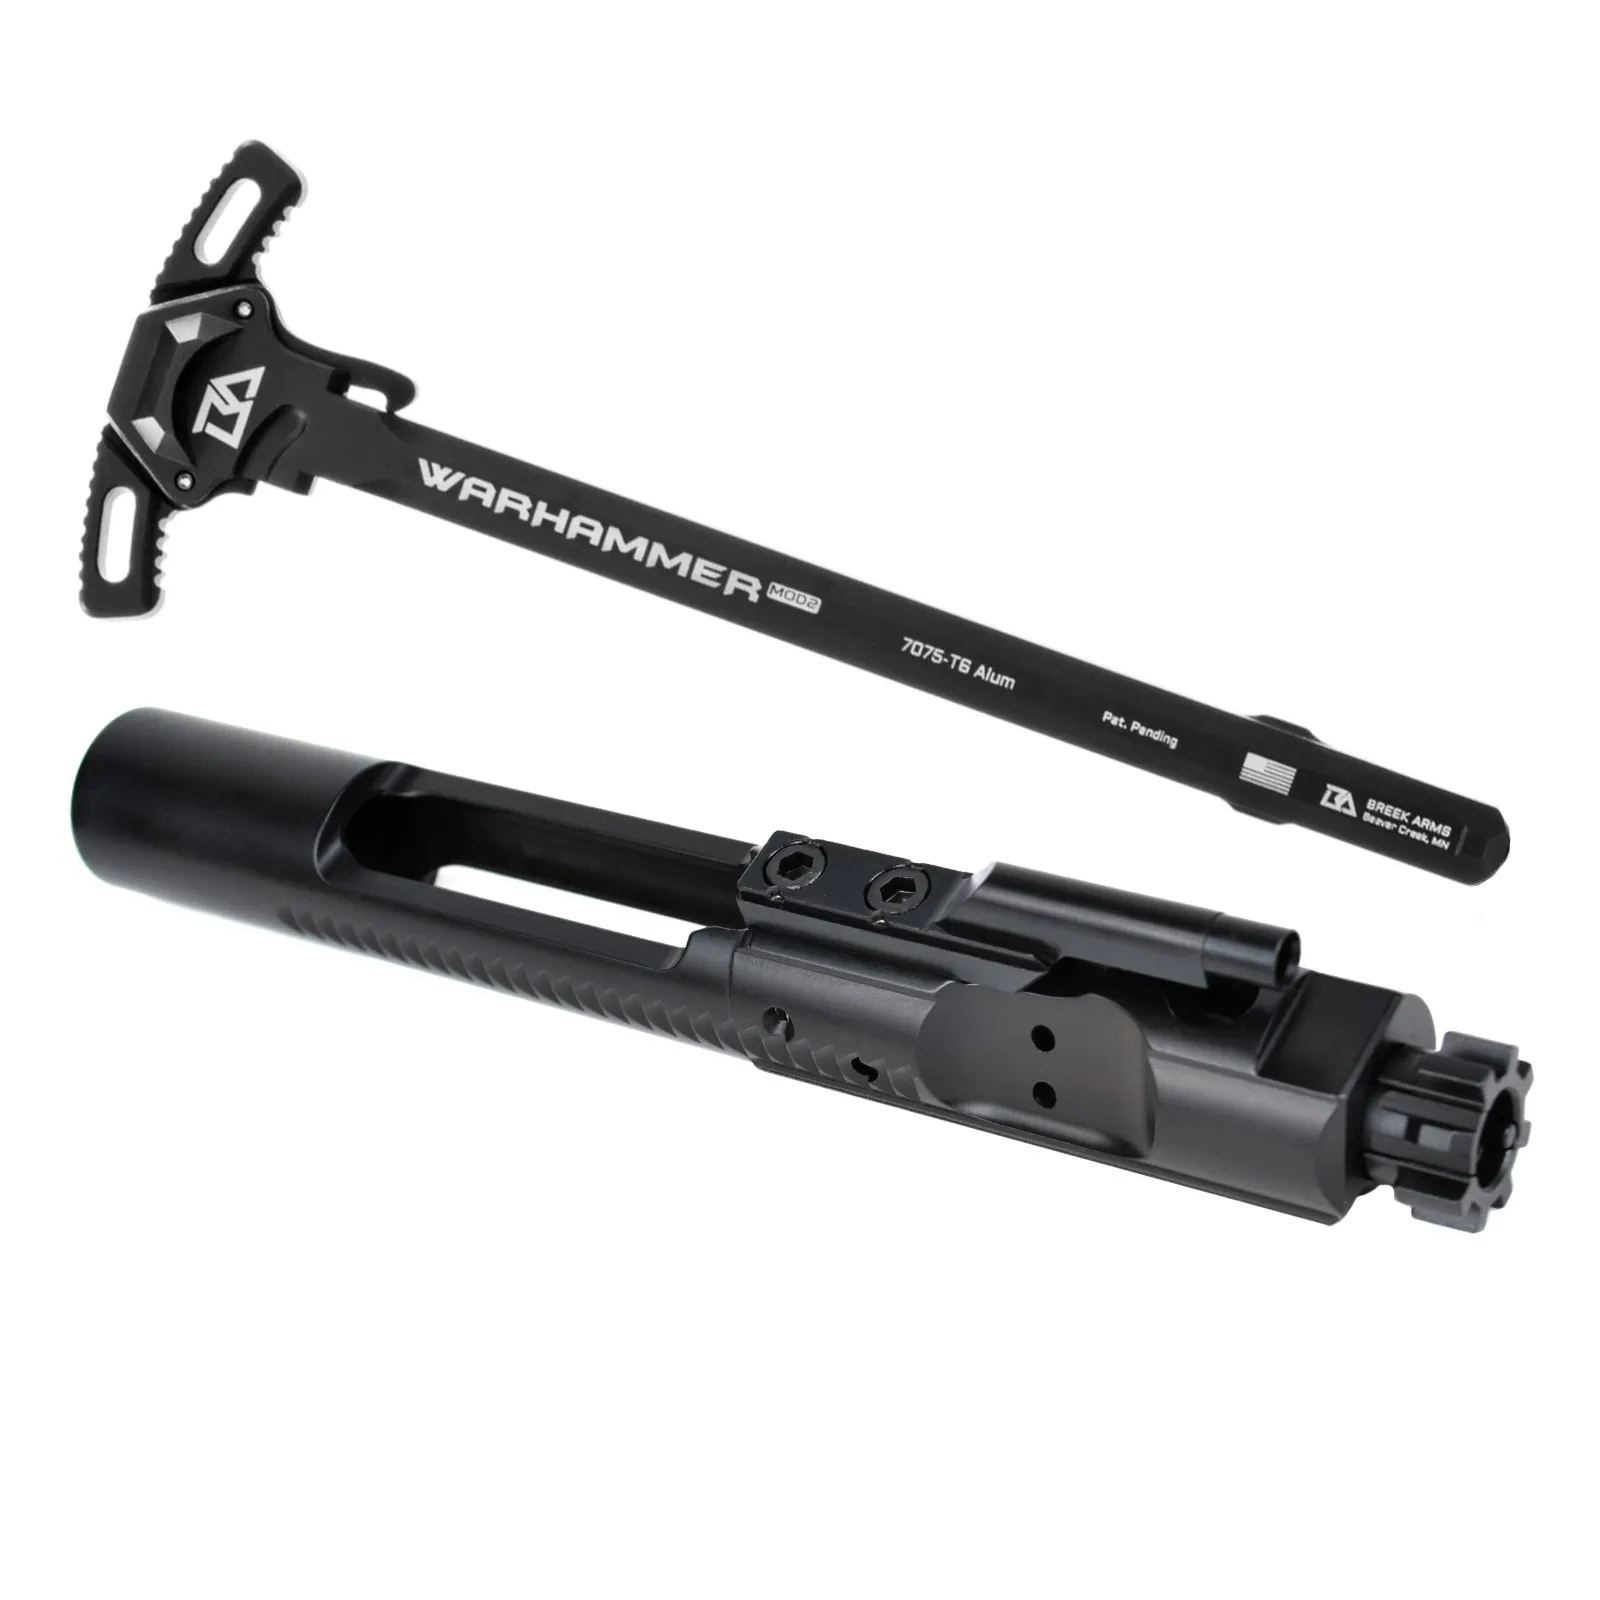 AT3™ Black Nitride 5.56 Bolt Carrier Group with Breek Arms Warhammer AR-15 Charging Handle